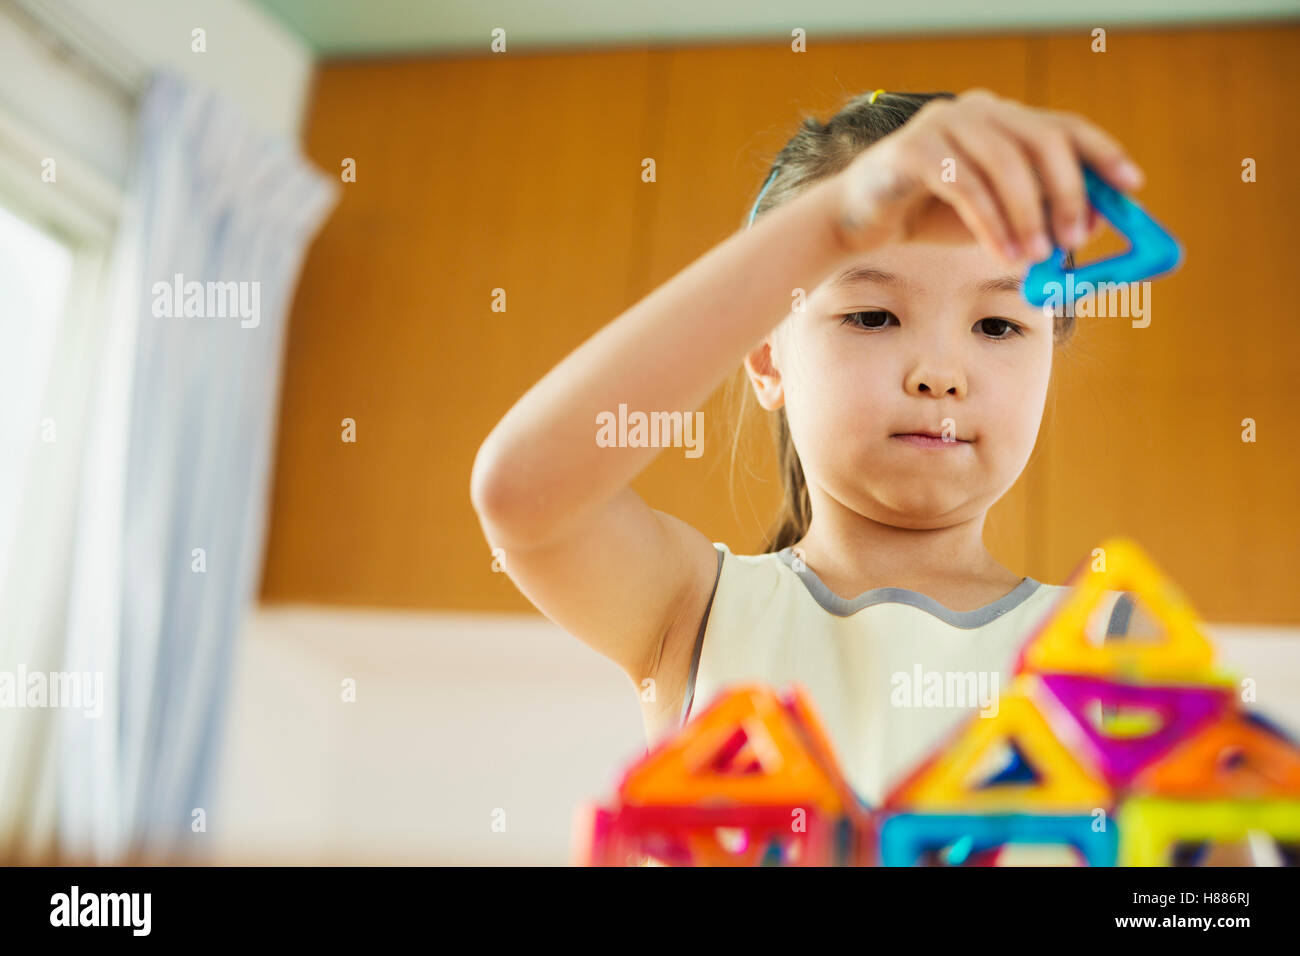 A girl playing, building a structure with colourful geometric shapes. Stock Photo